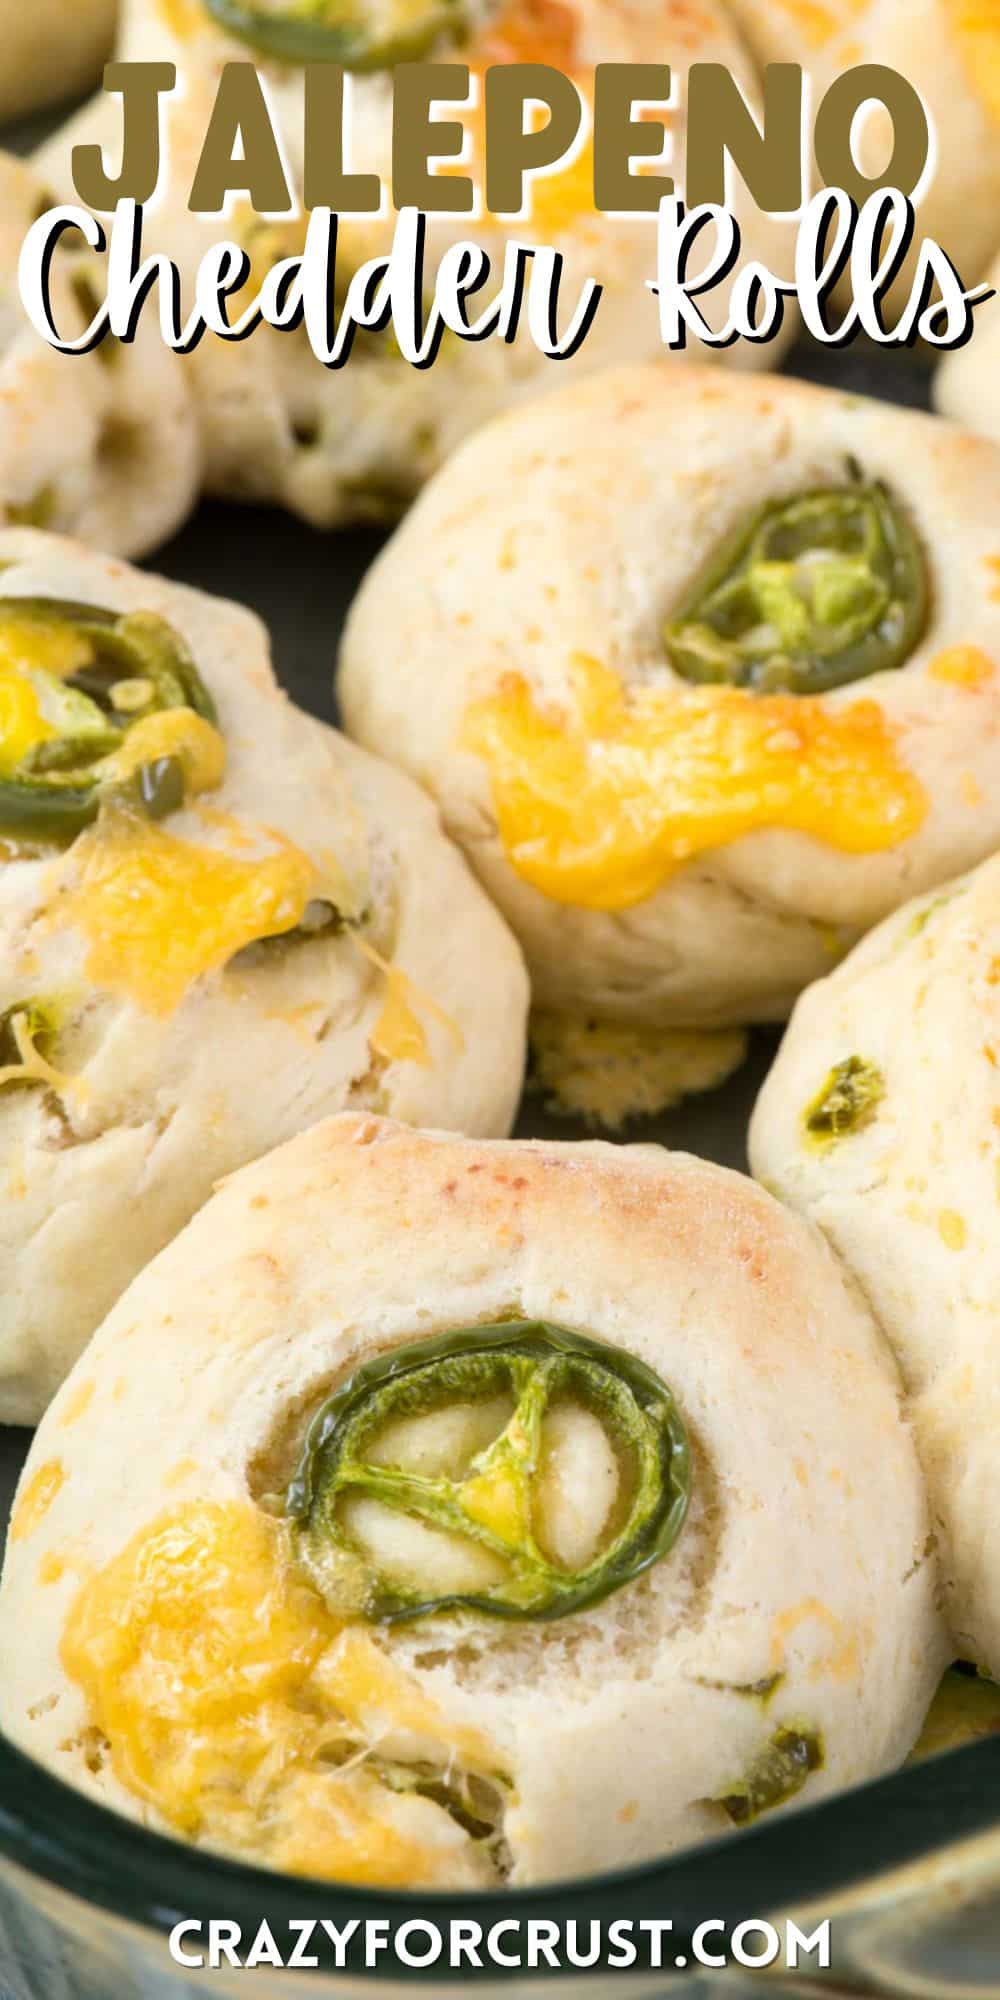 stacked jalapeno rolls with a jalapeño baked in on top and words on the image